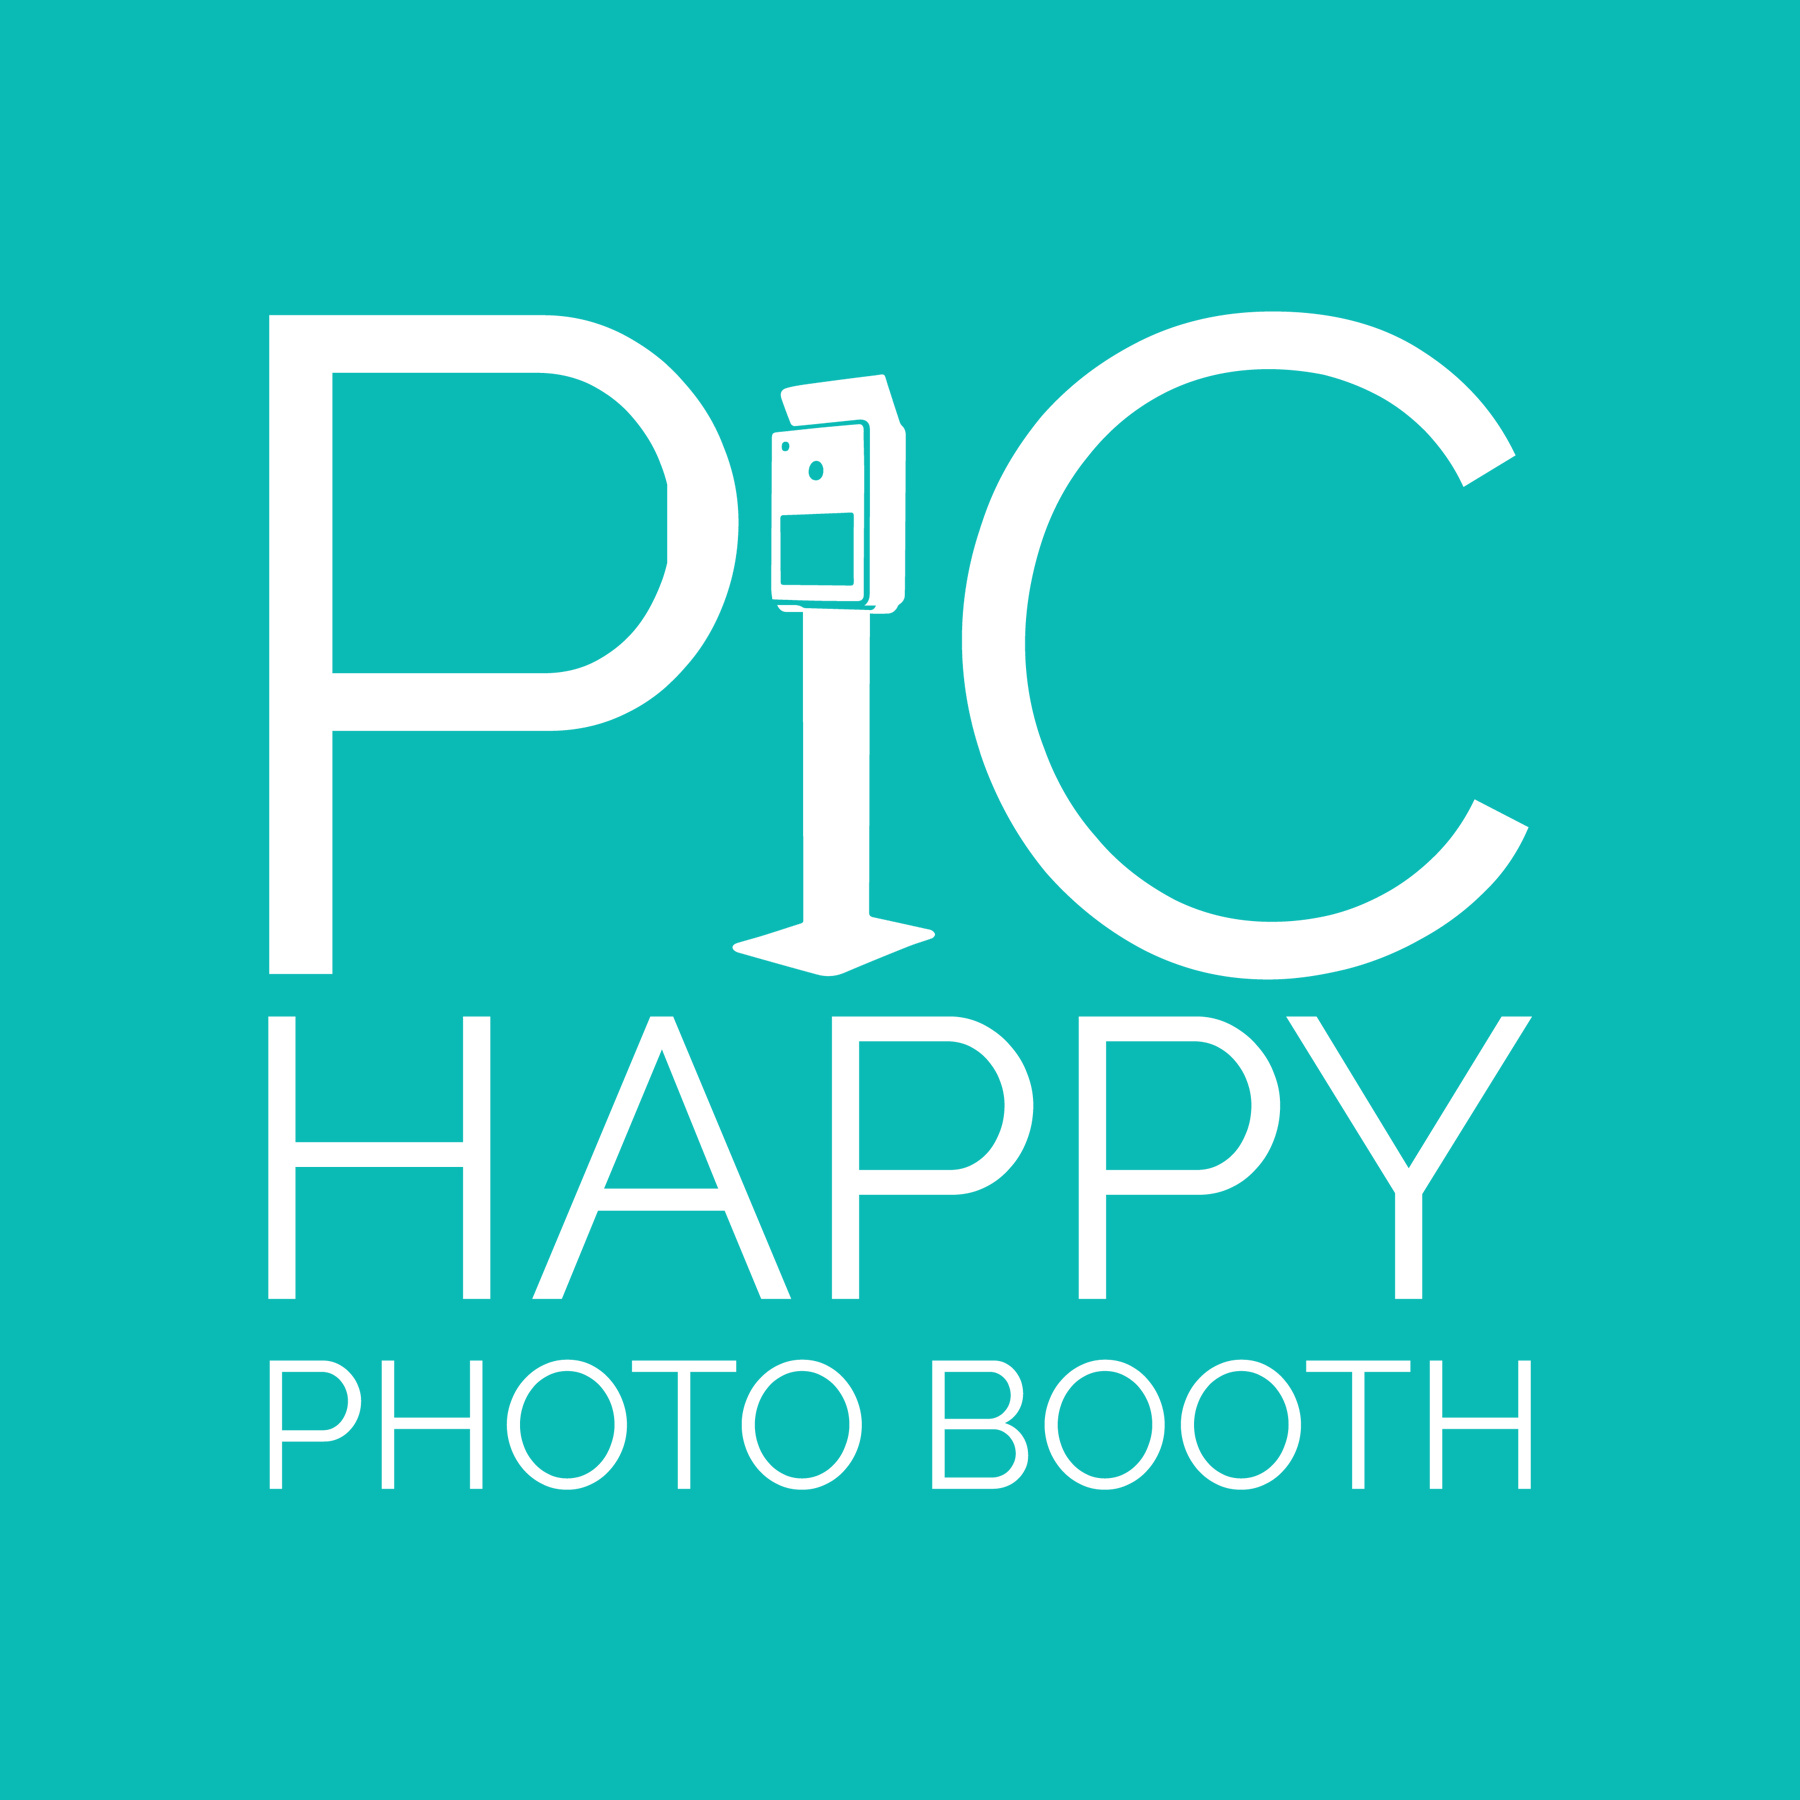 PIC HAPPY Photo Booth